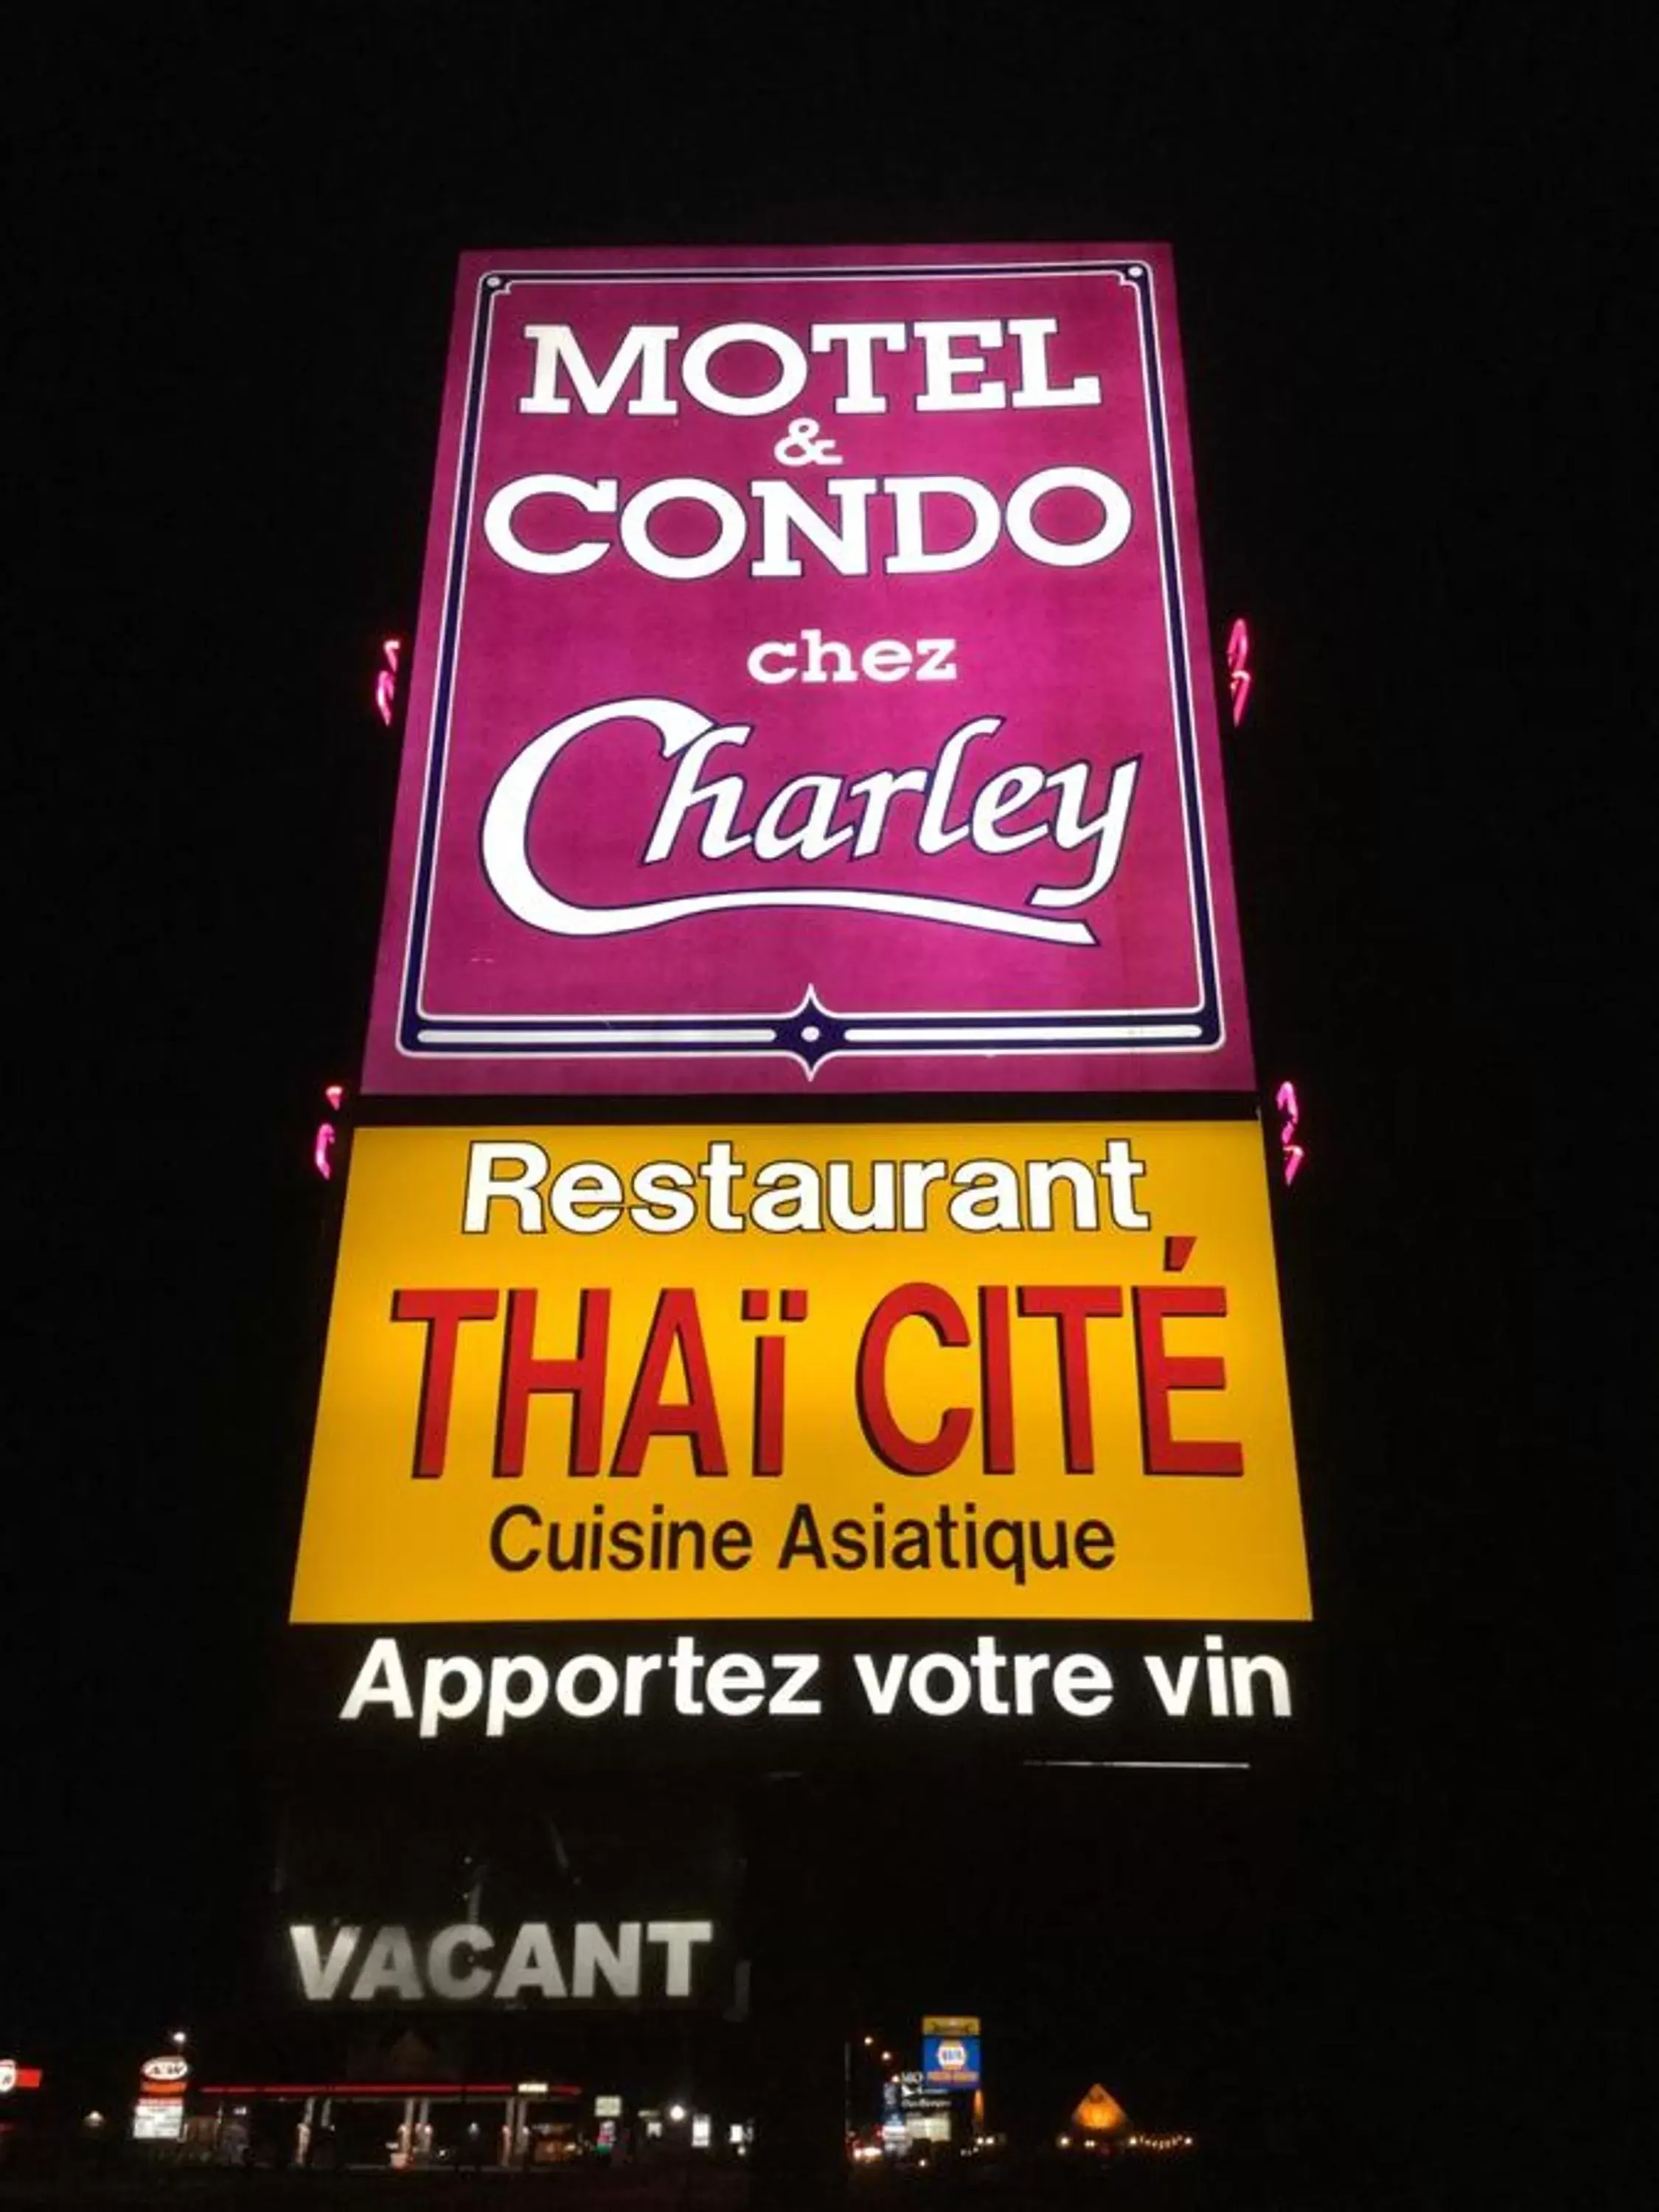 Property building, Logo/Certificate/Sign/Award in Motel Et Condo Chez Charley